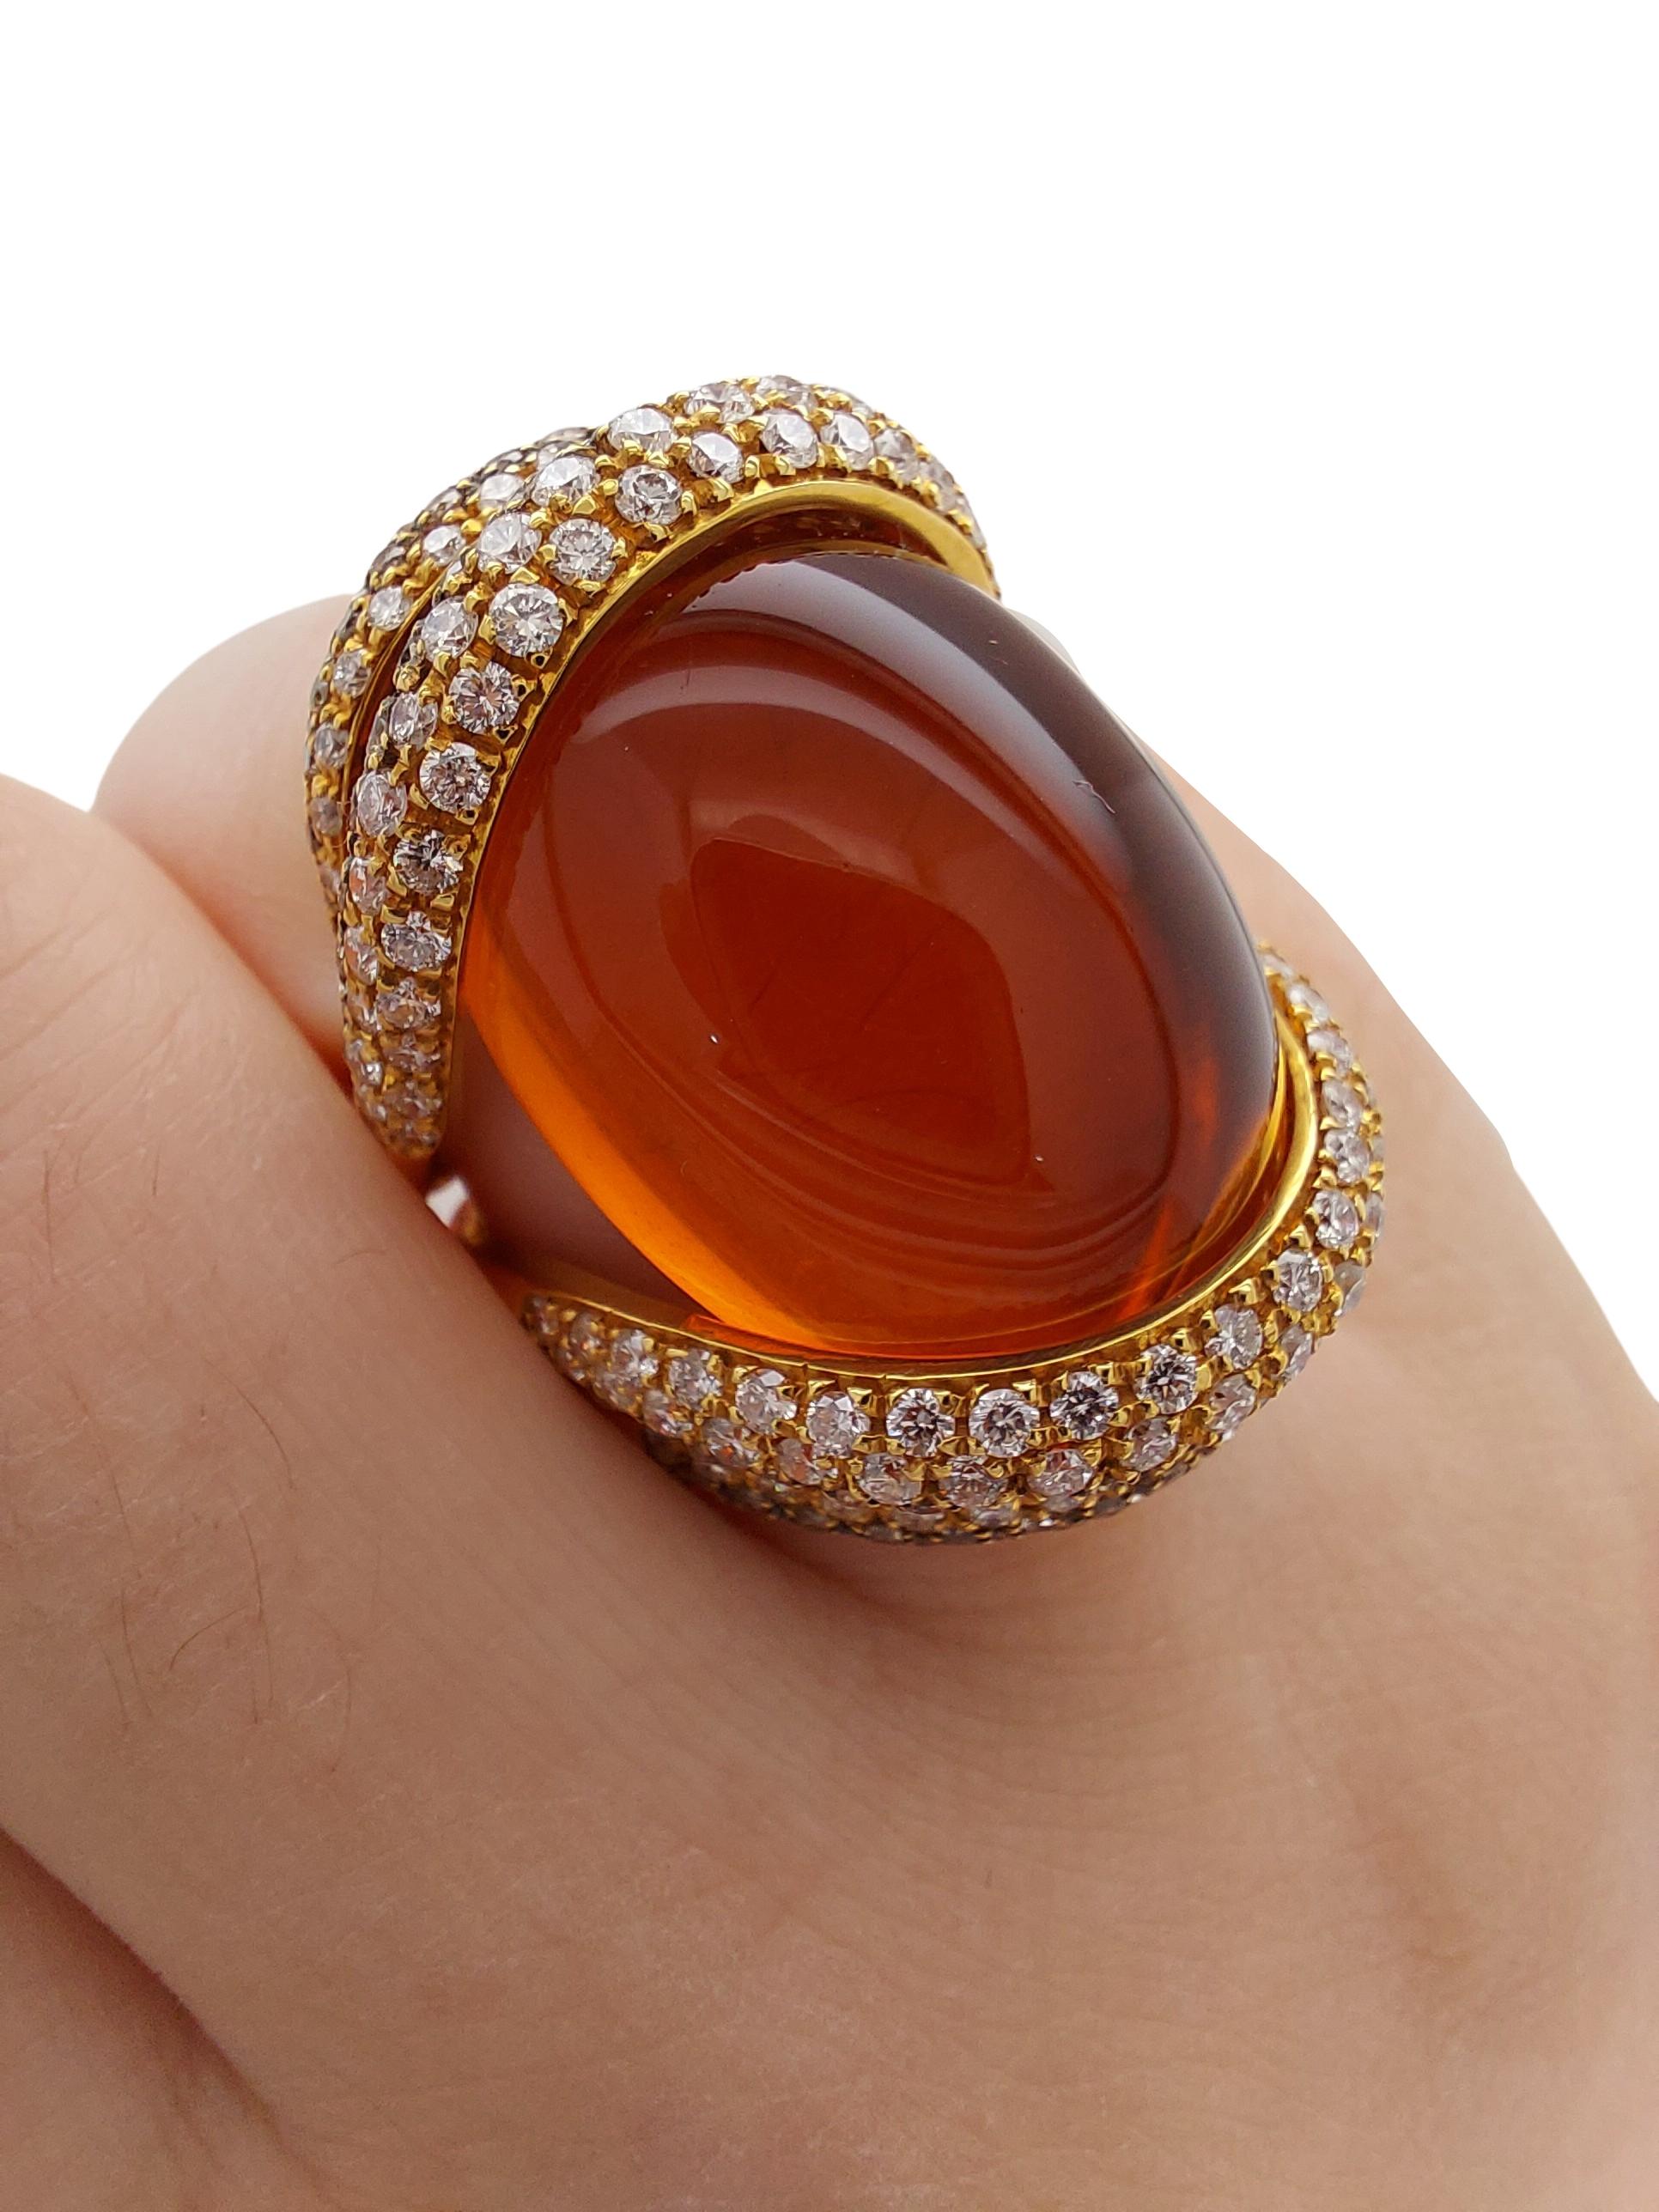 Magnificent Yellow Gold Ring with 34 Ct Cabochon Citrine and 2.61 Ct Diamonds For Sale 4